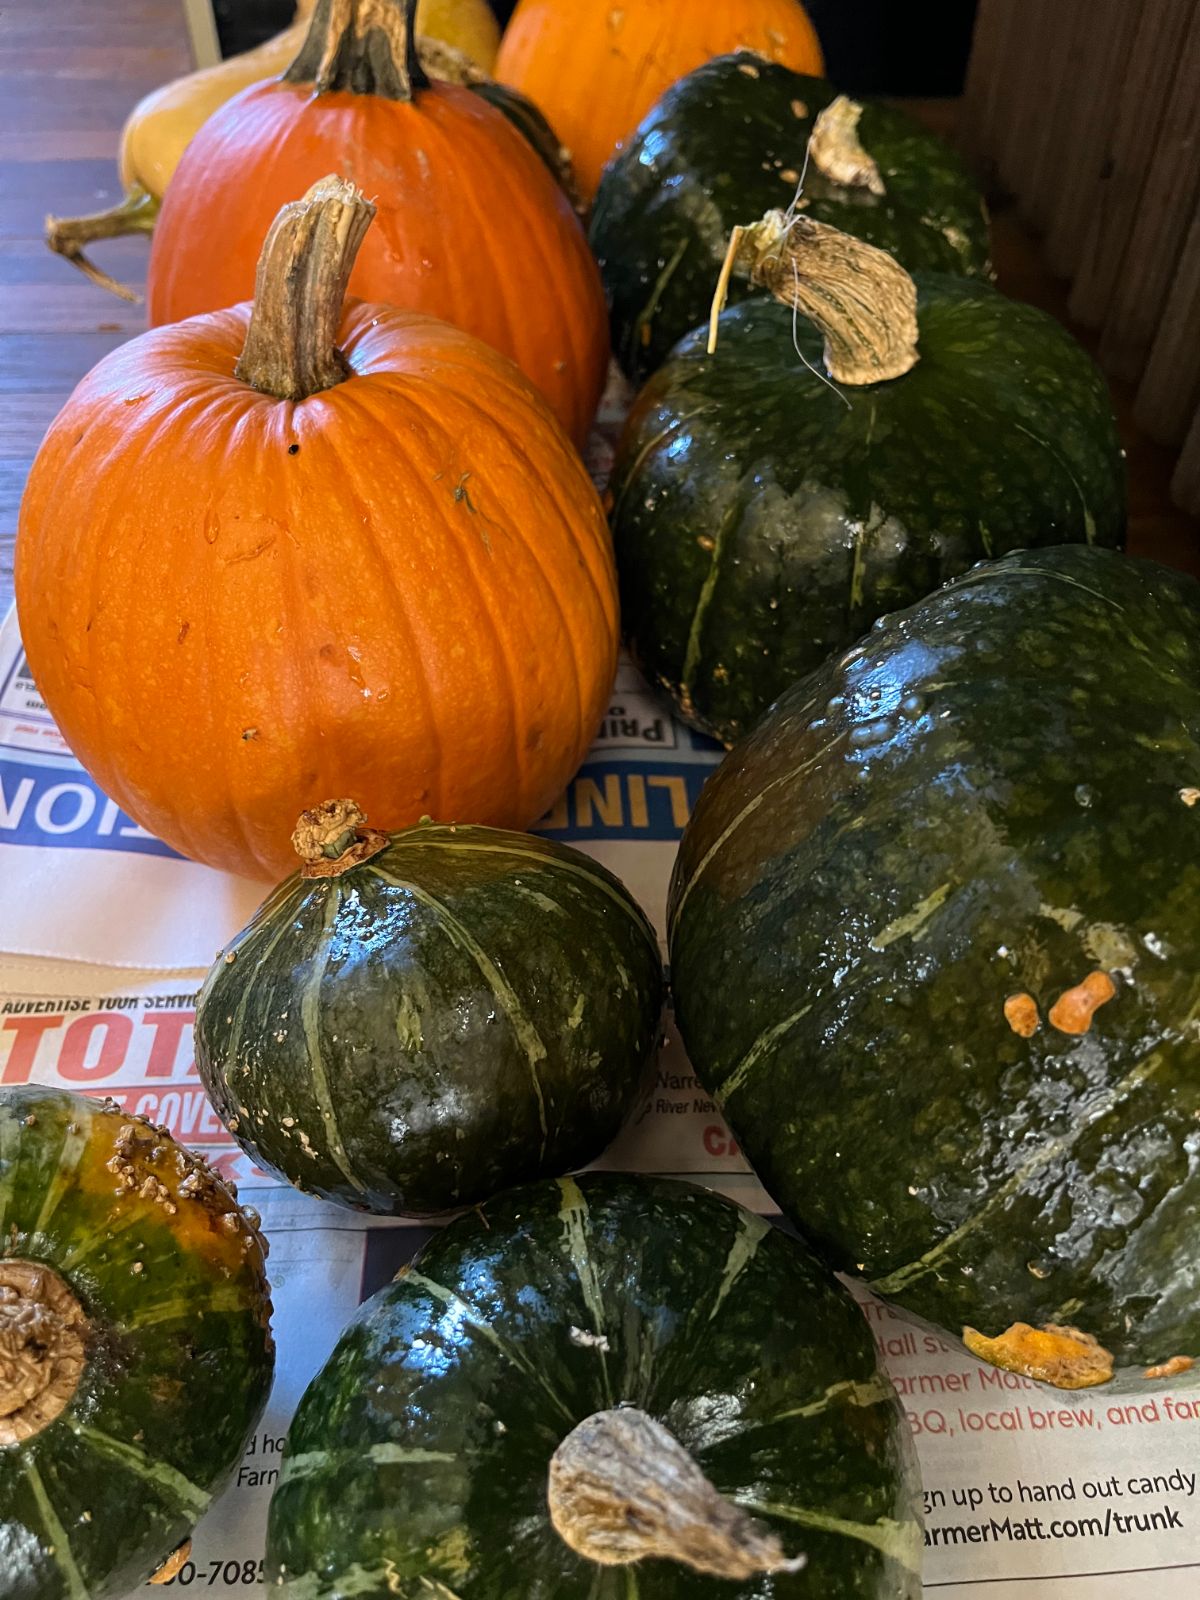 Winter squash ready for cold storage